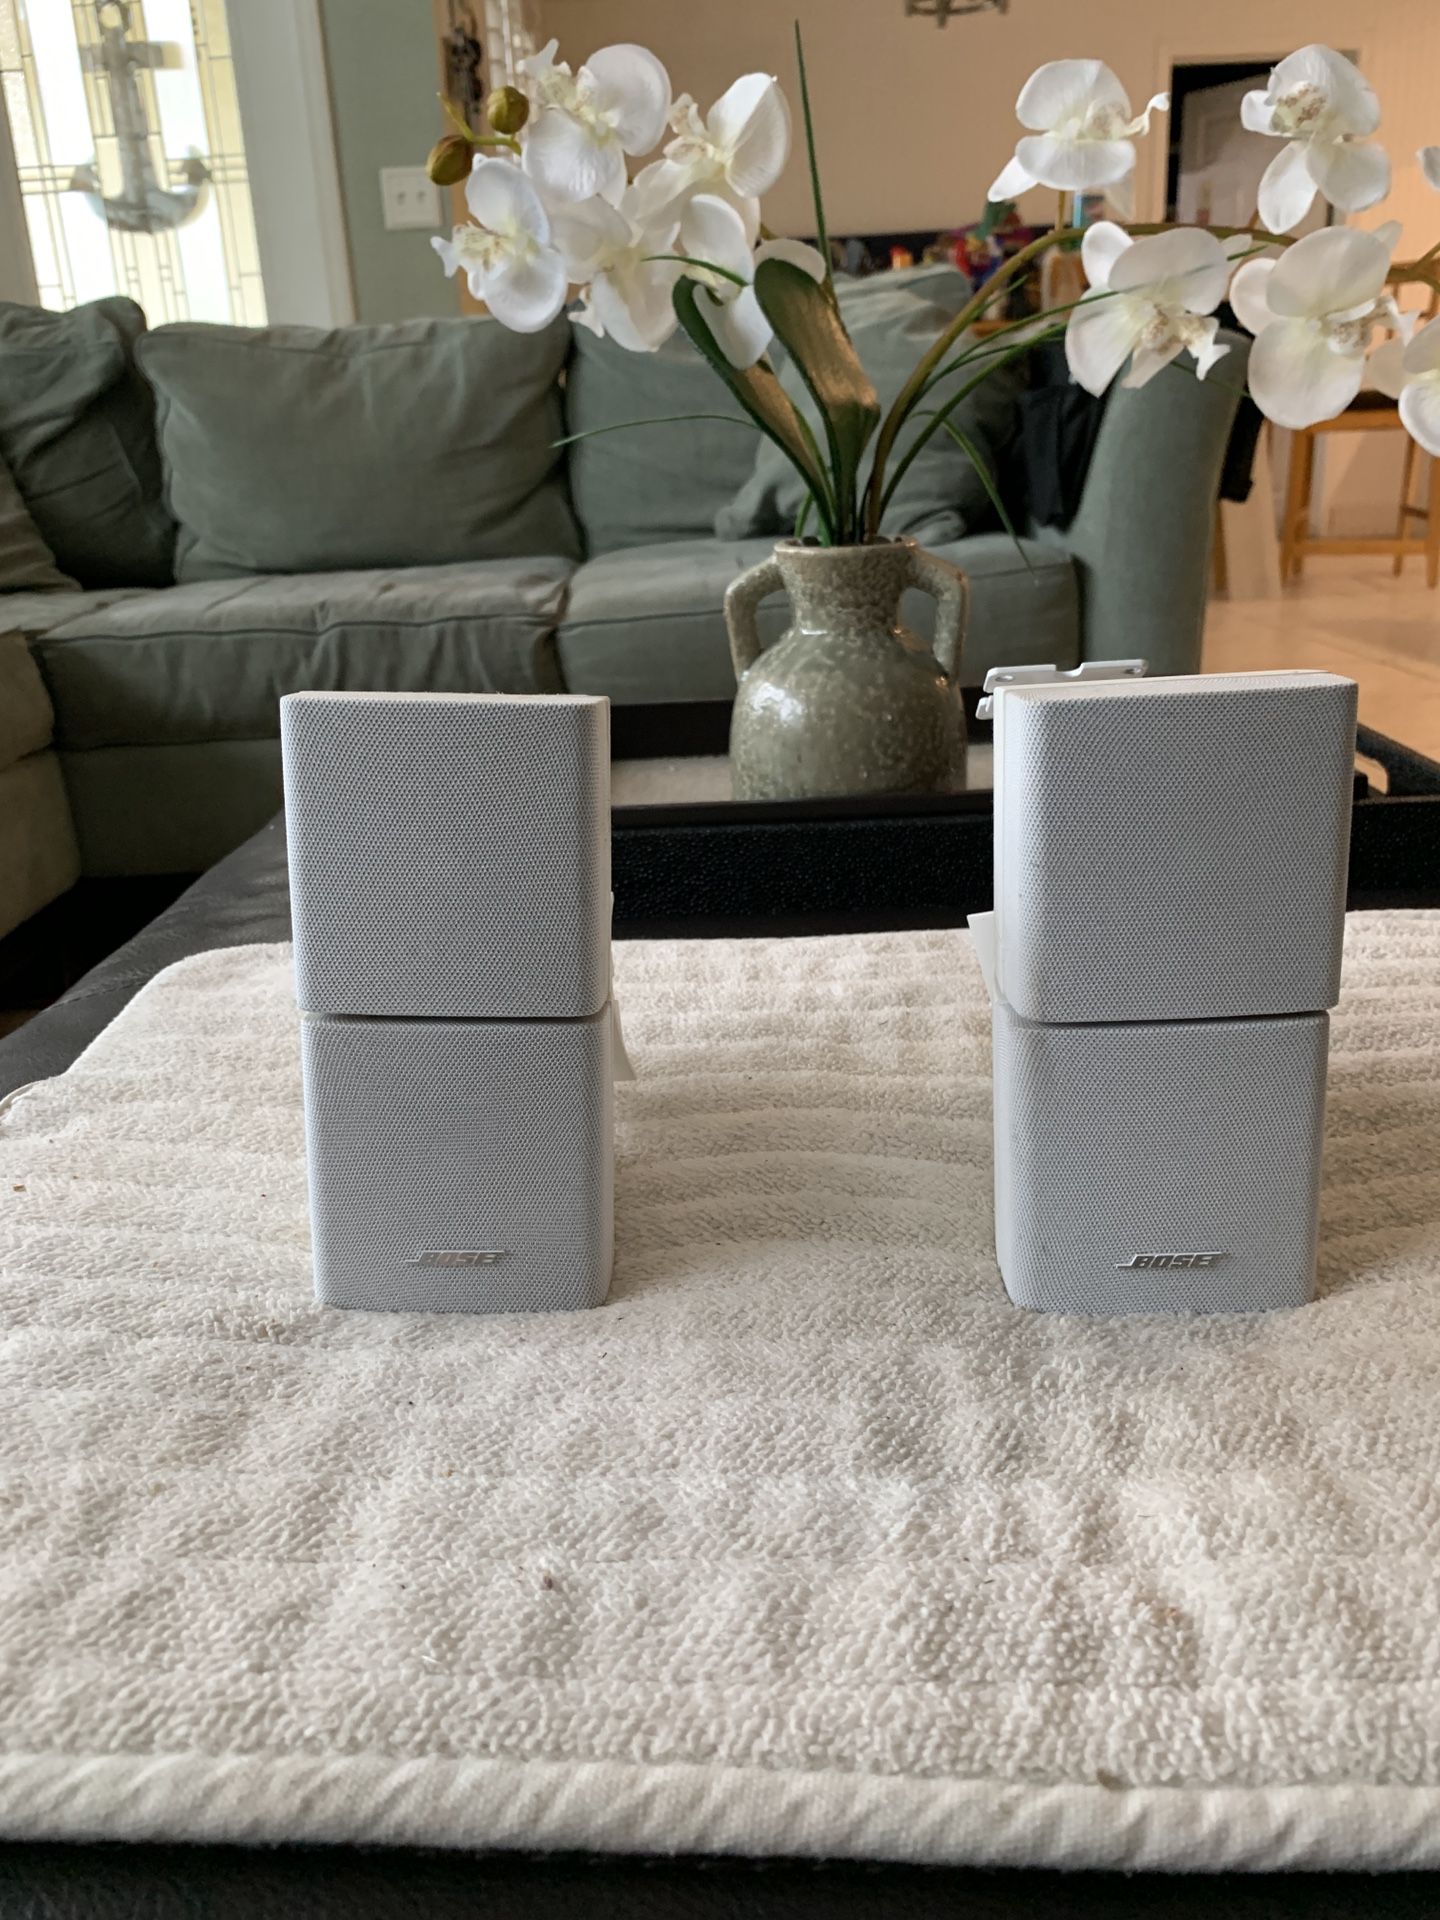 Bose Accoustimass 10 speakers with wall or ceiling mount.